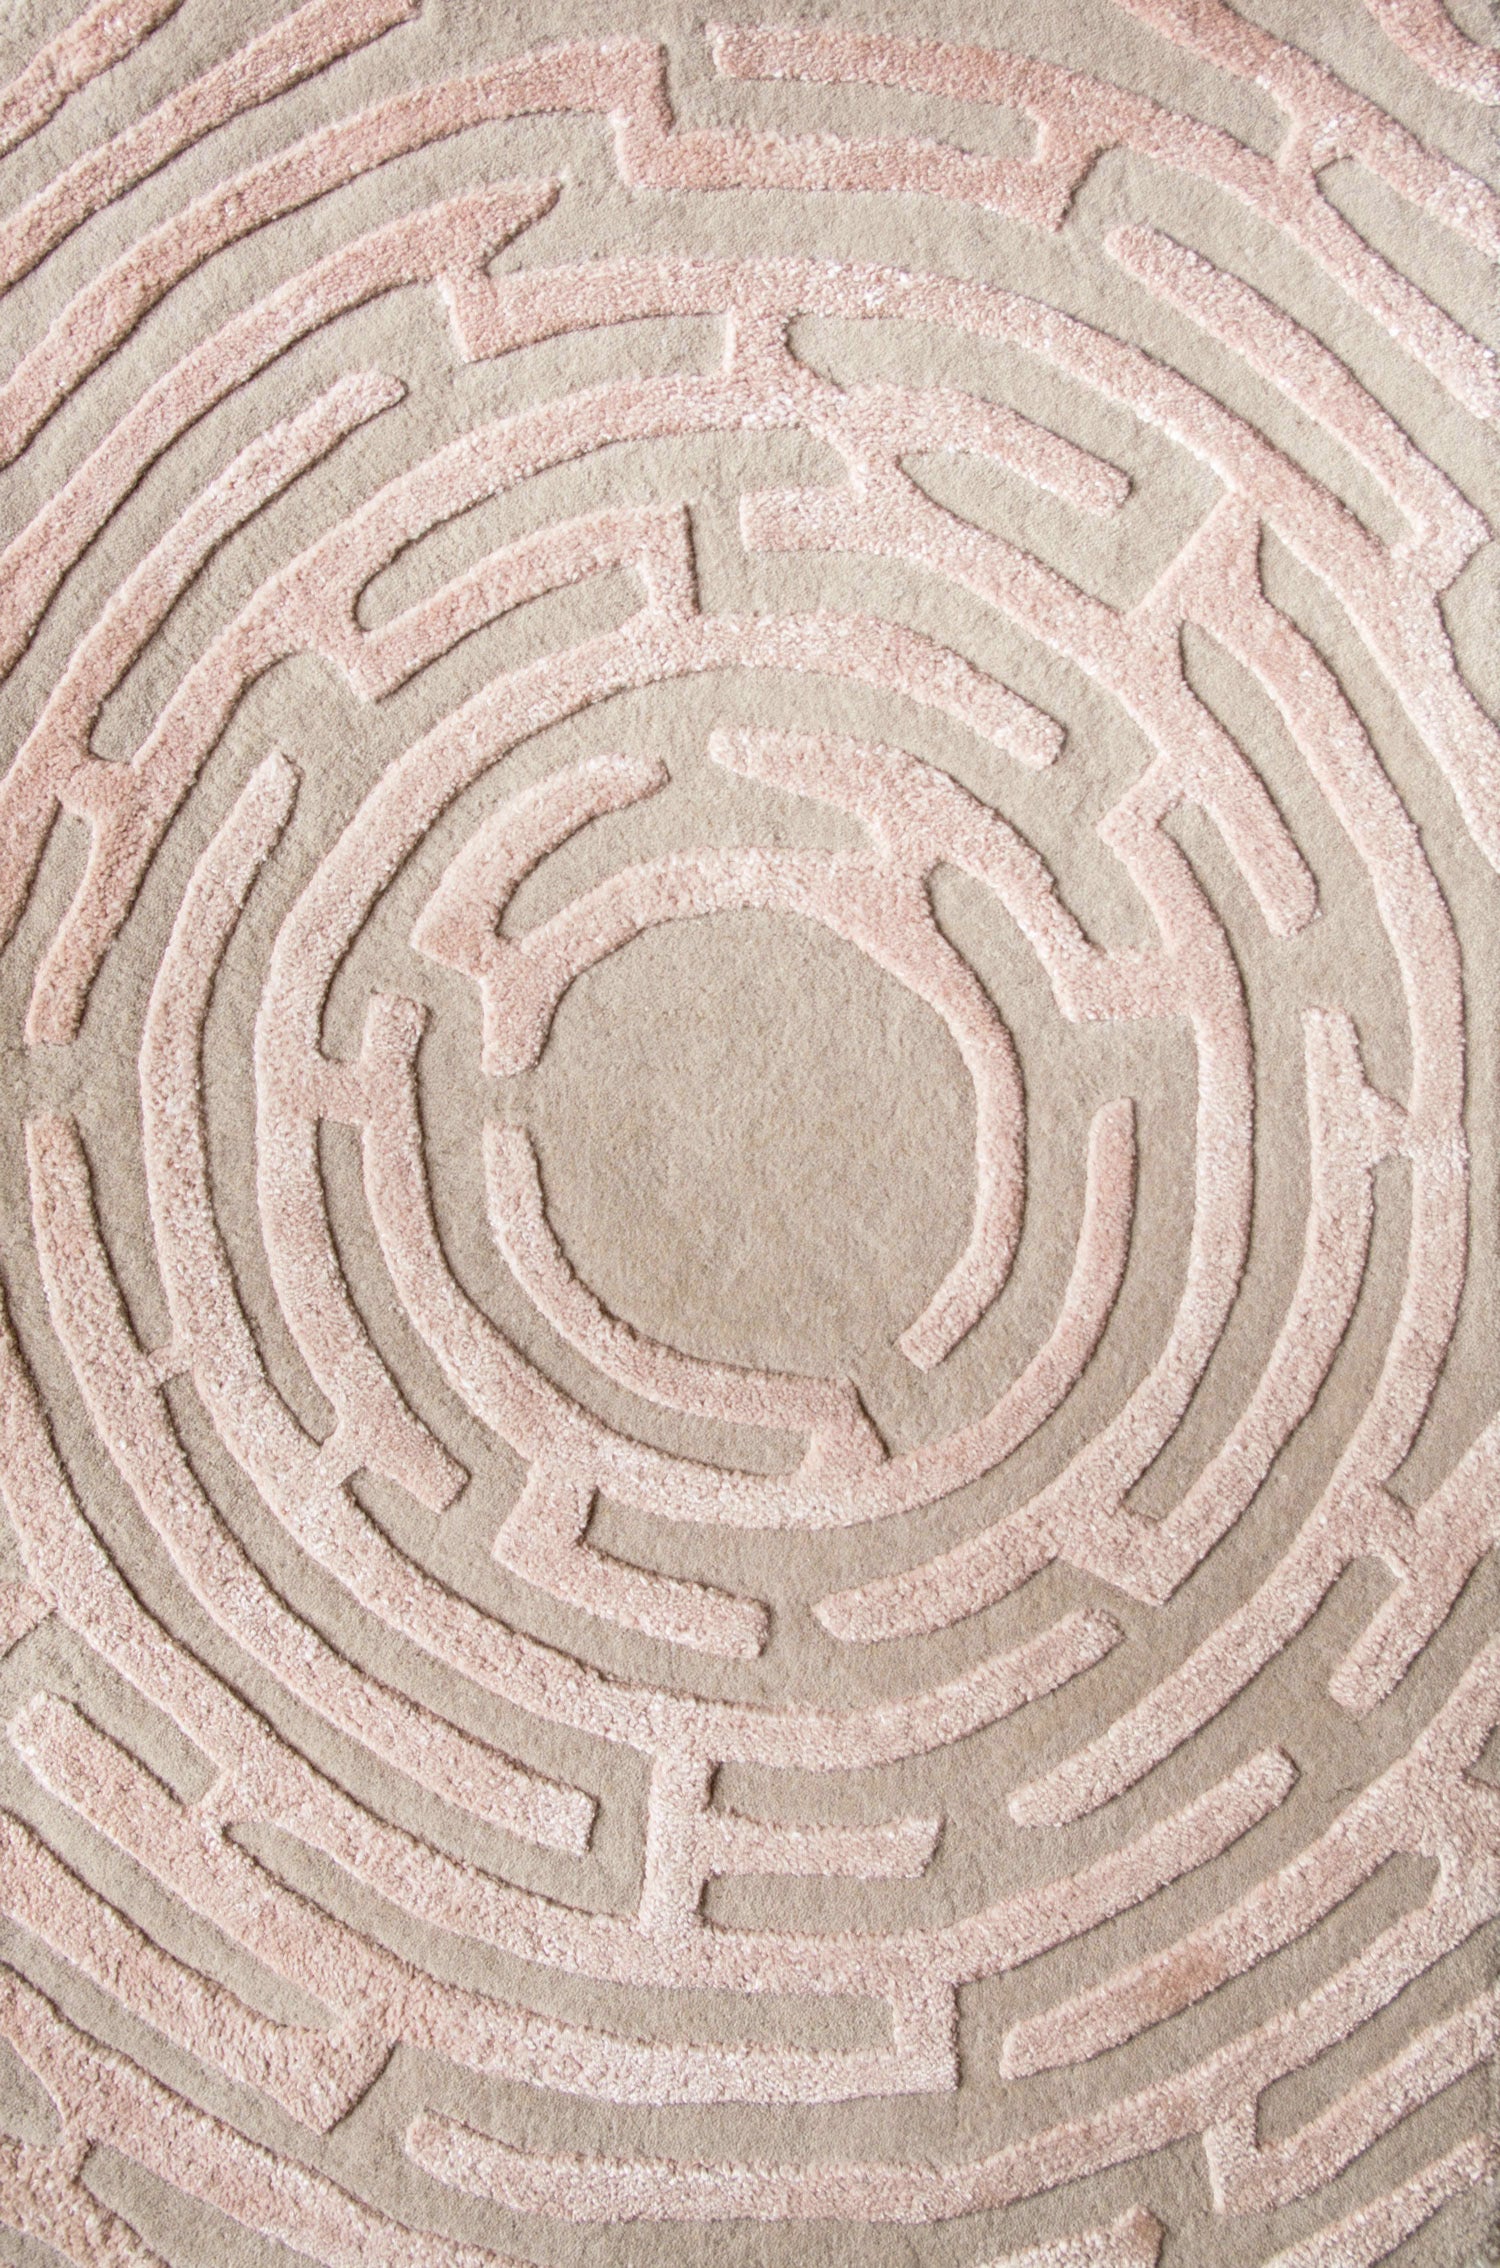 Maze luxury floor rug with a peony pink border outlining a beige maze